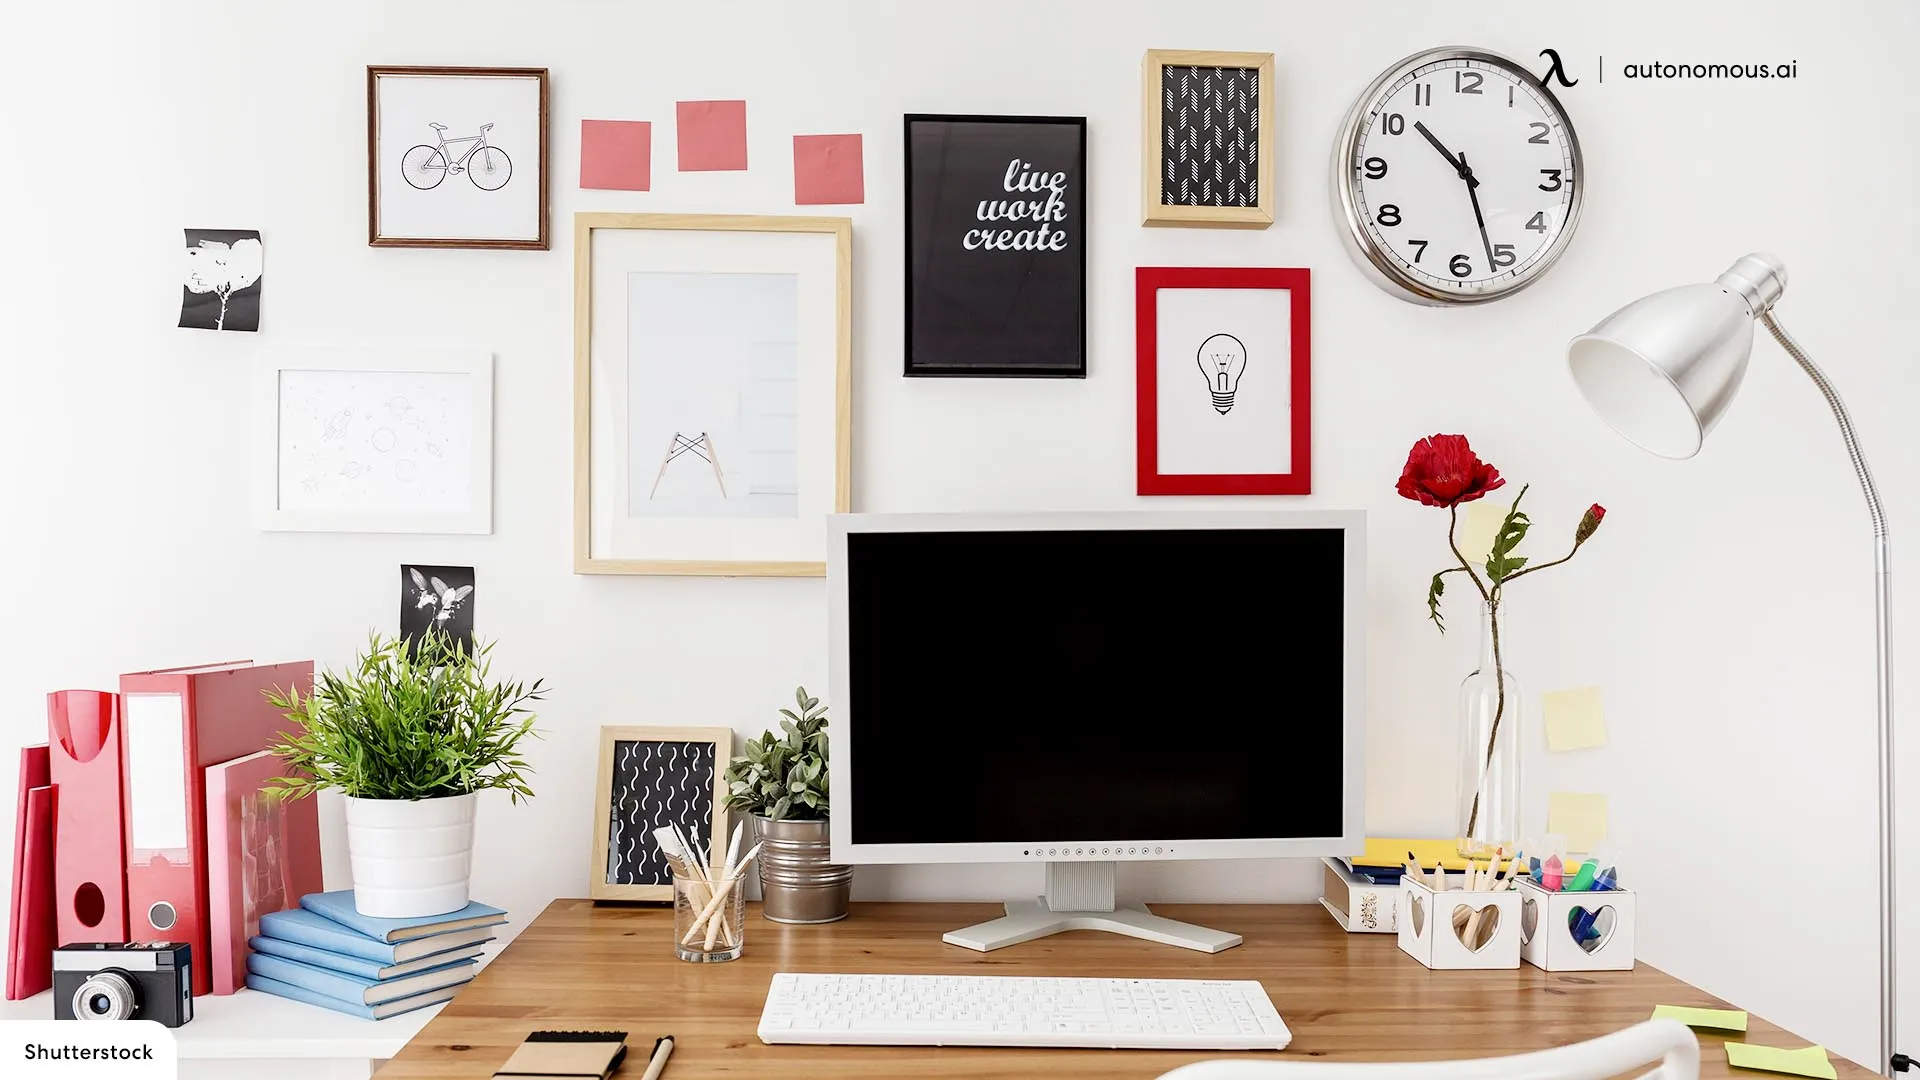 Set a Theme for Your home office mood board